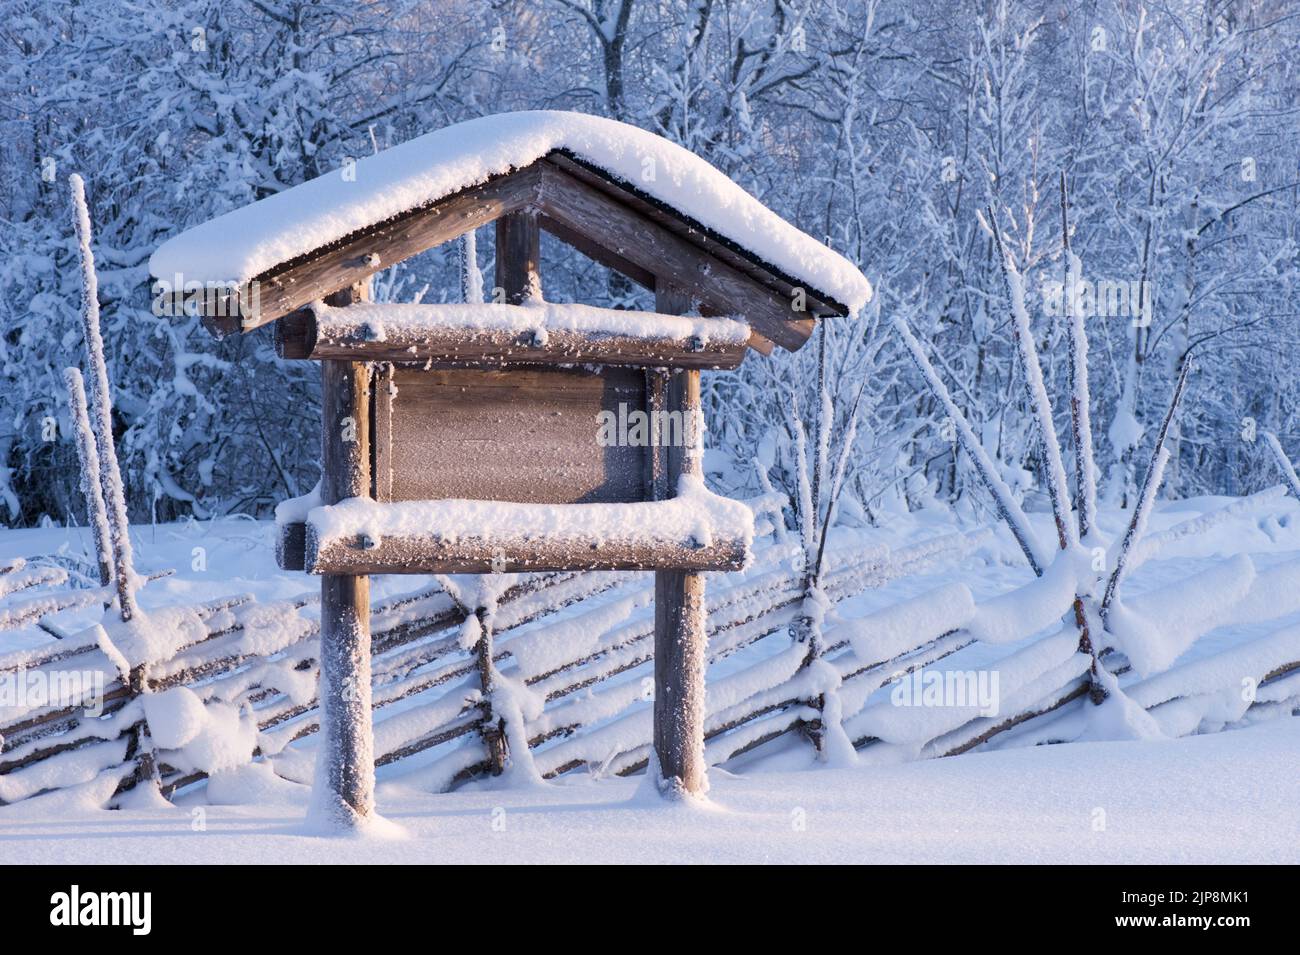 Snow covered empty information board and old fence in winter landscape. Stock Photo